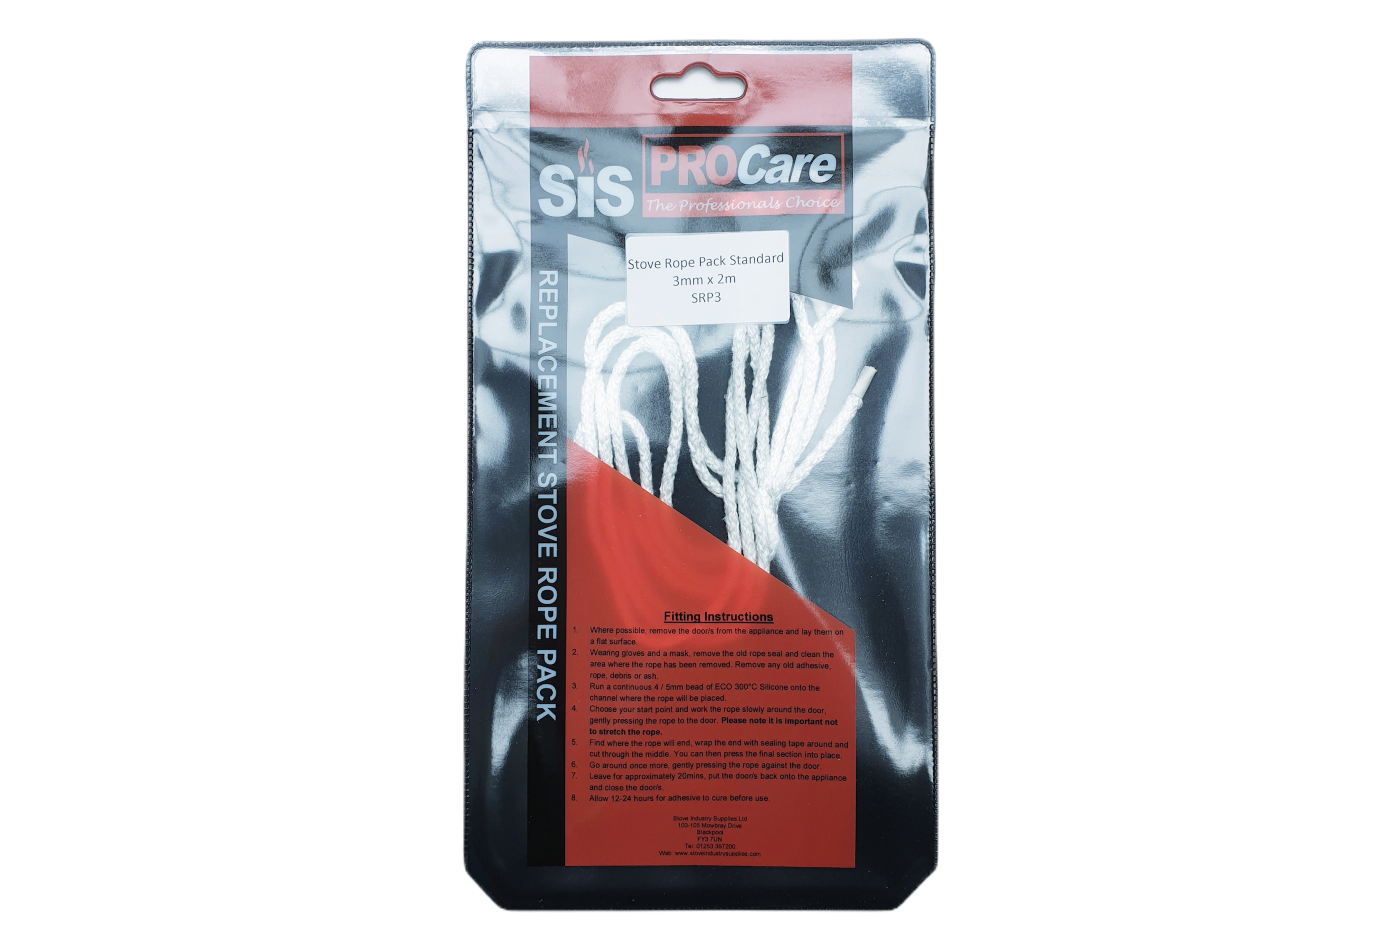 SiS Procare White 3 milimetre x 2 metre Standard Stove Rope Pack - product code SRP3